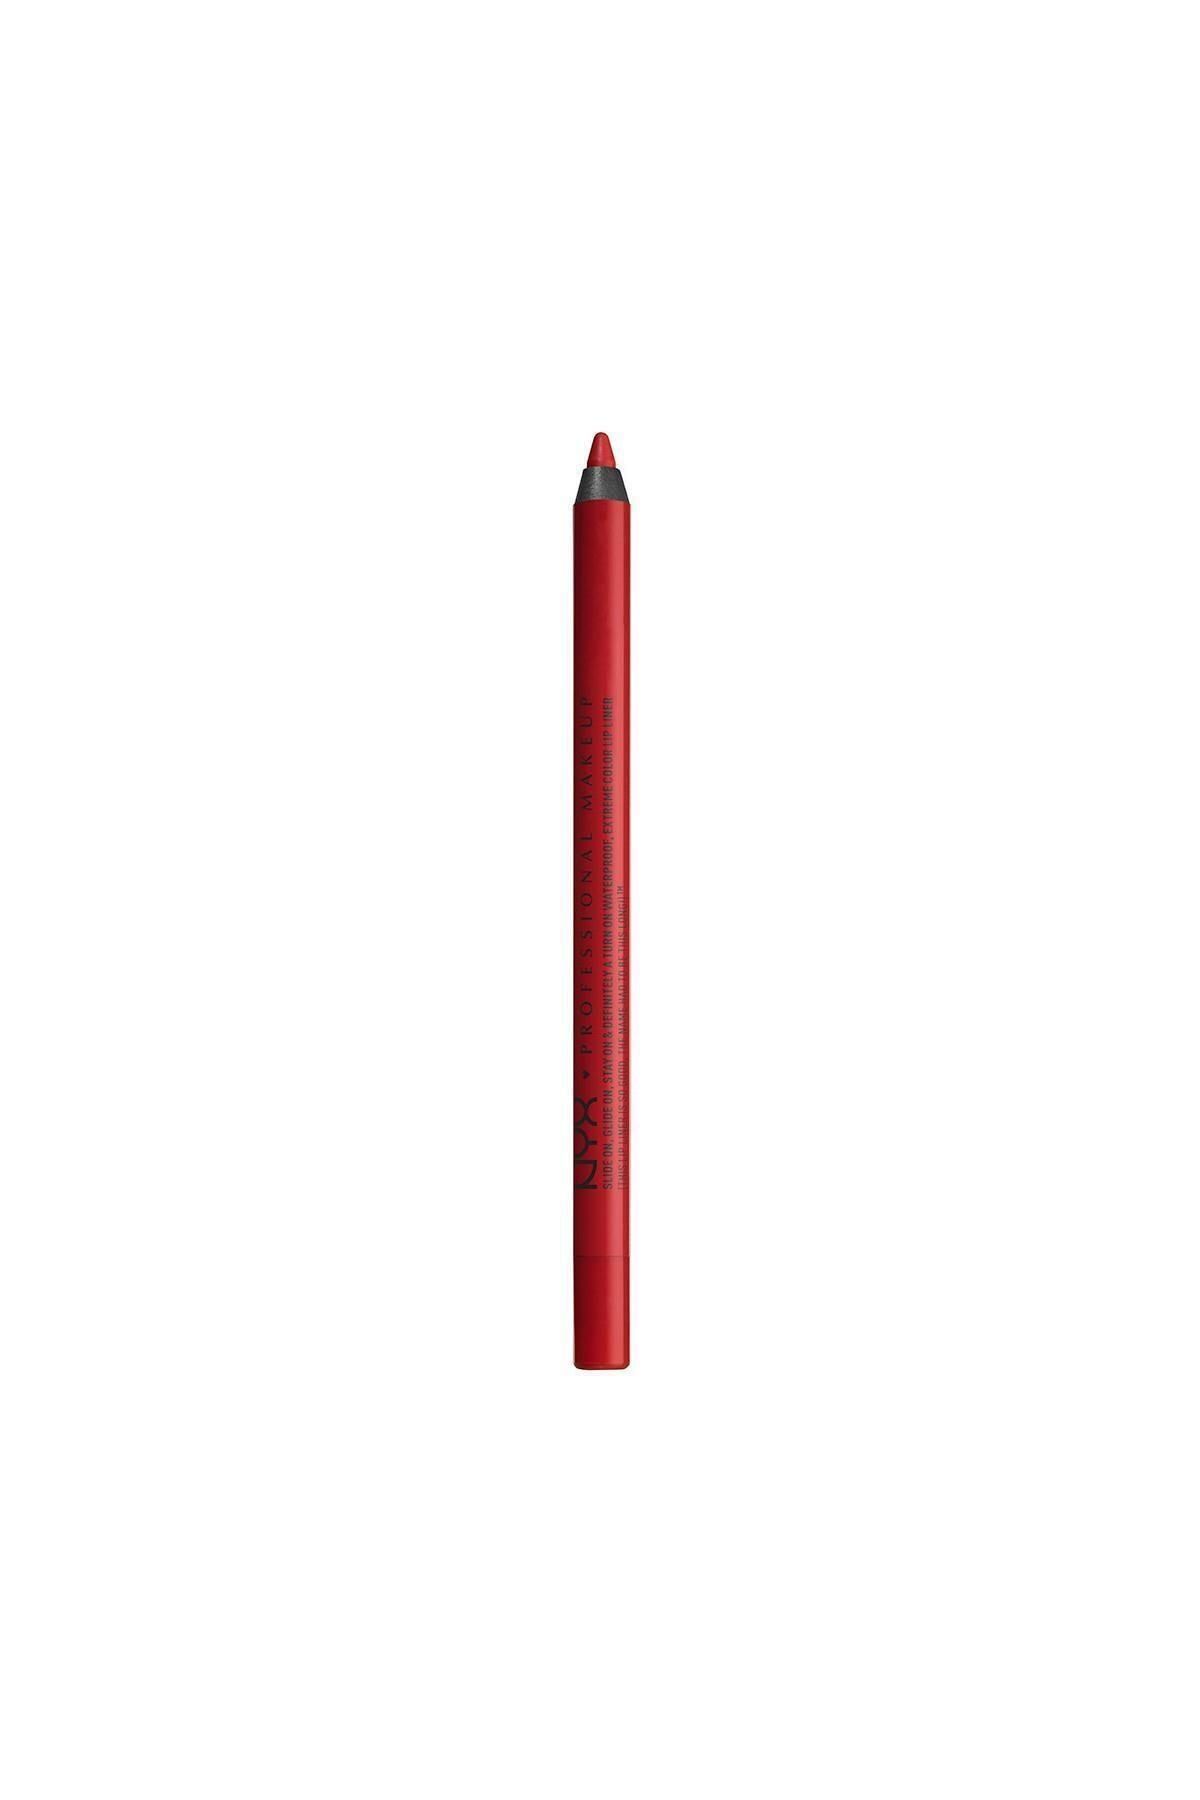 NYX Professional Makeup Red Tape Slide on Lip Pencil 5 g 800897839512